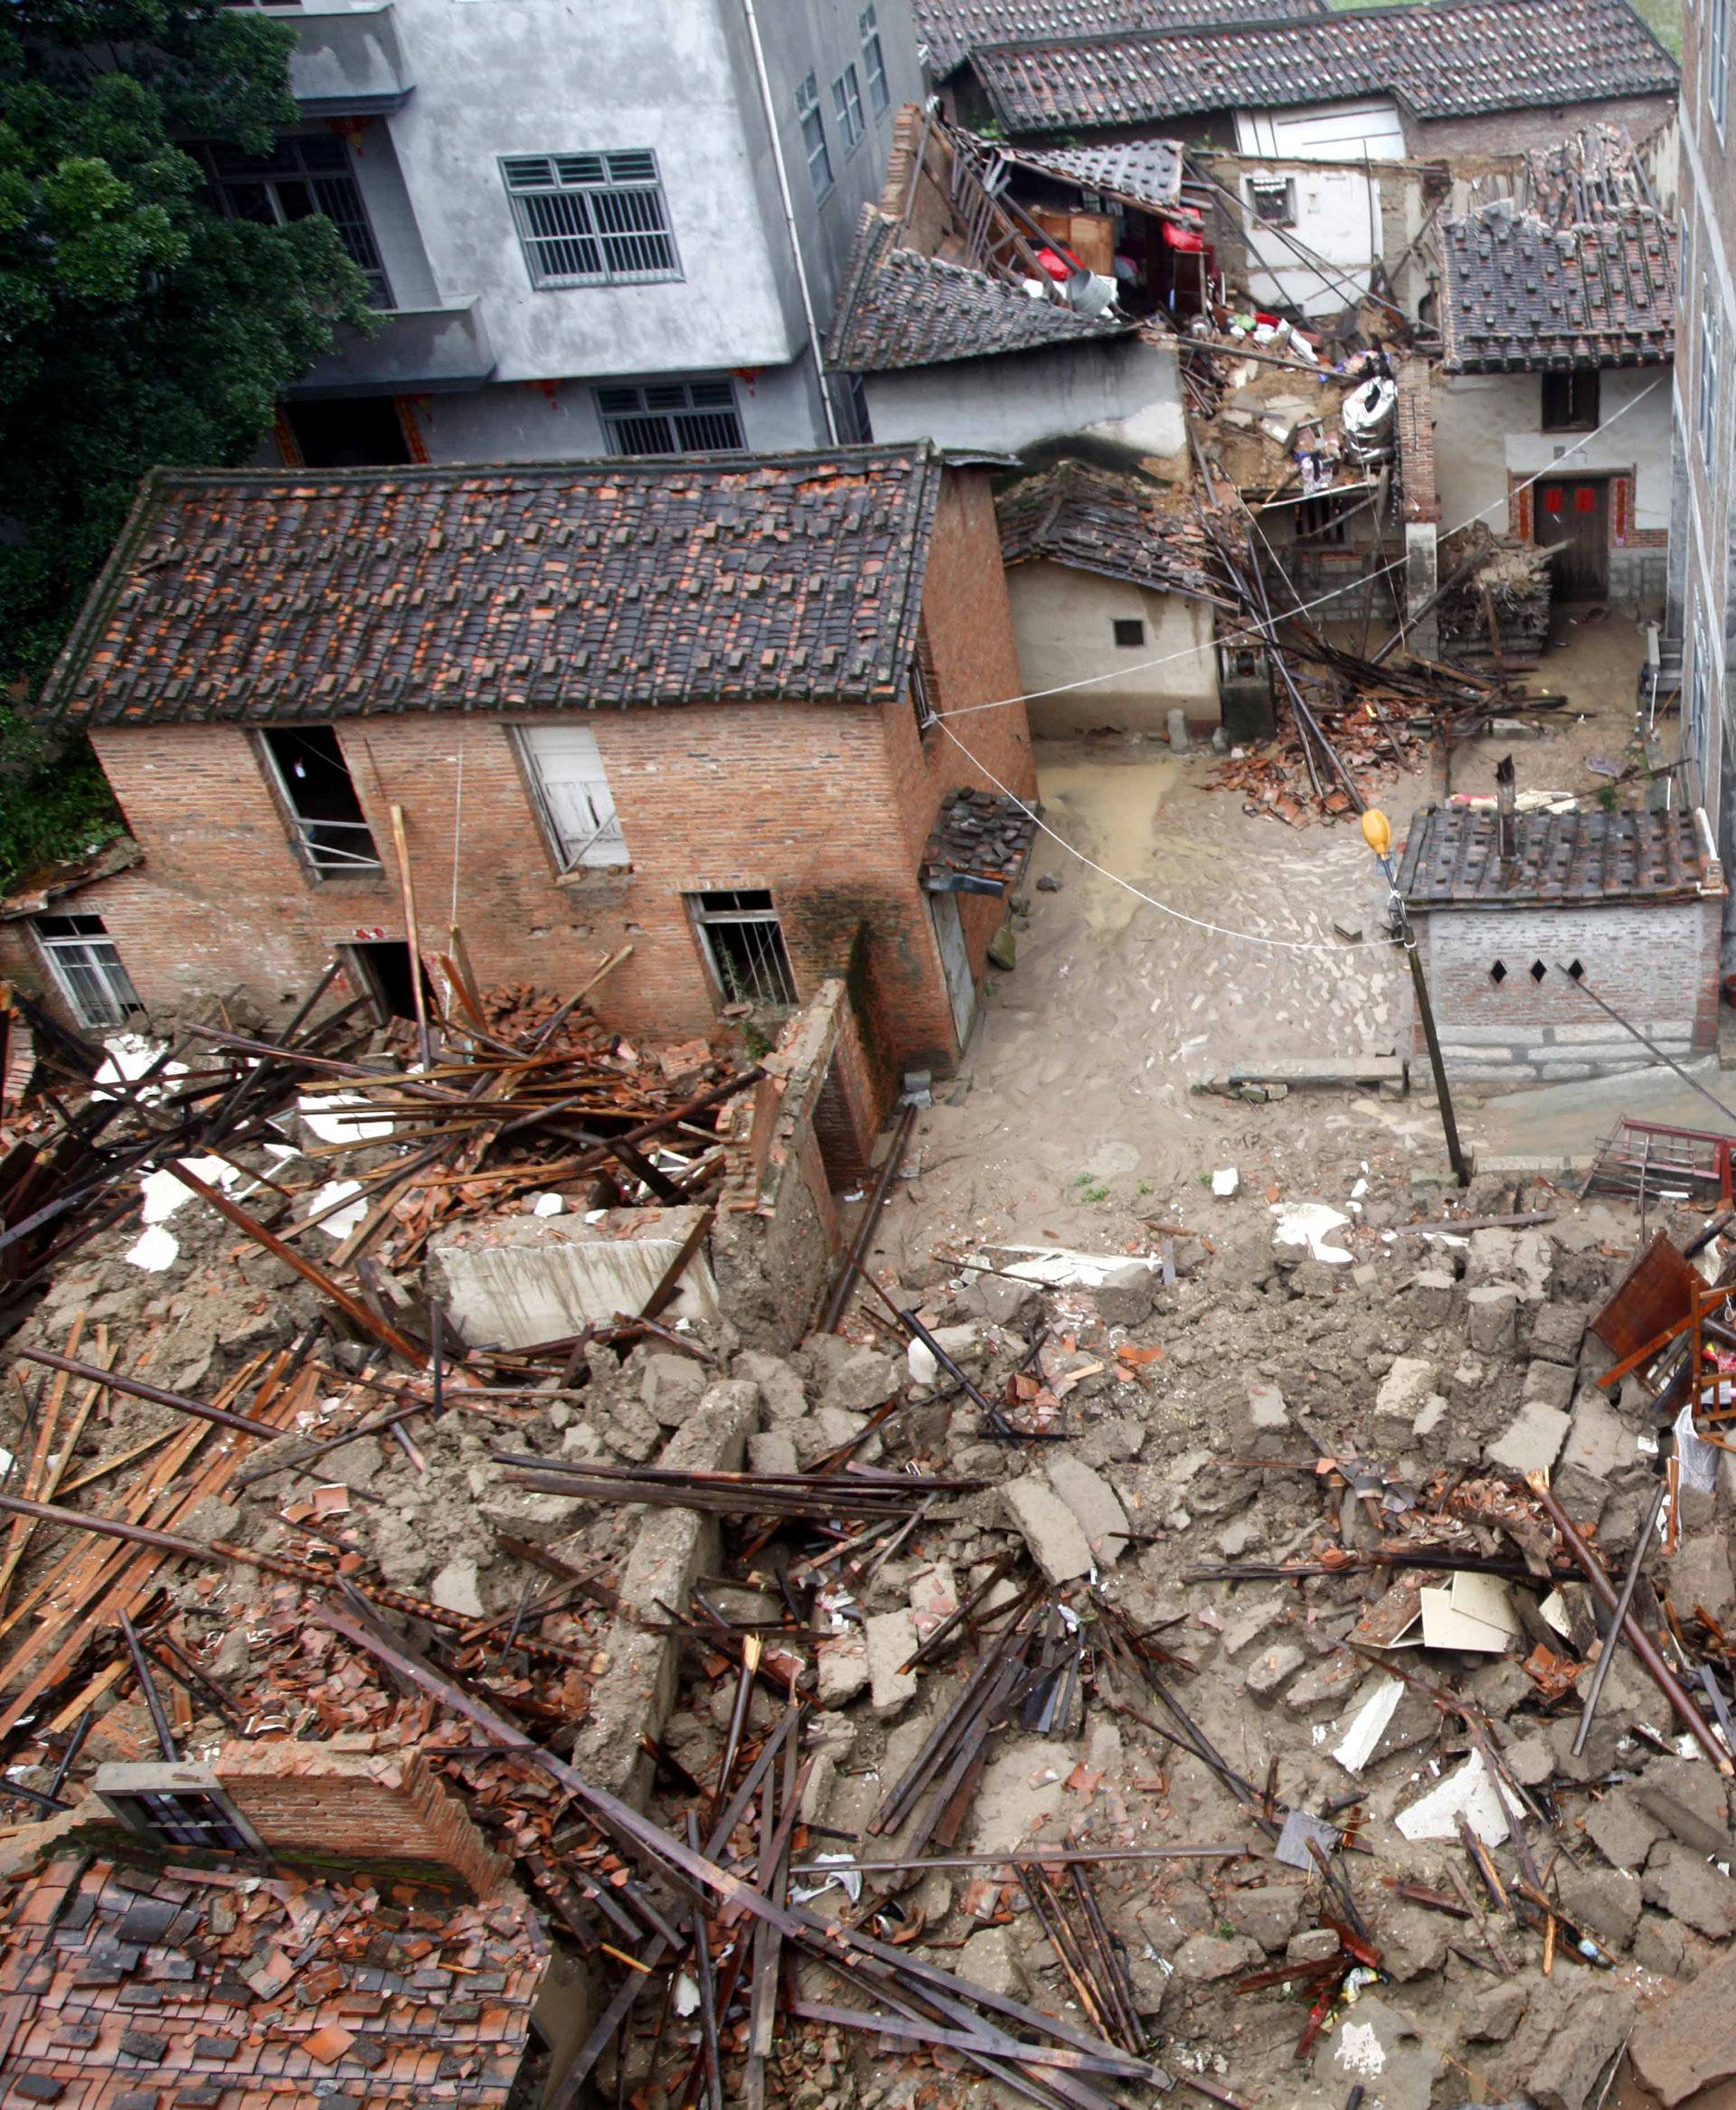 Damaged and collapsed buildings are seen as Typhoon Nepartak brings heavy rainfall in Putian, Fujian Province